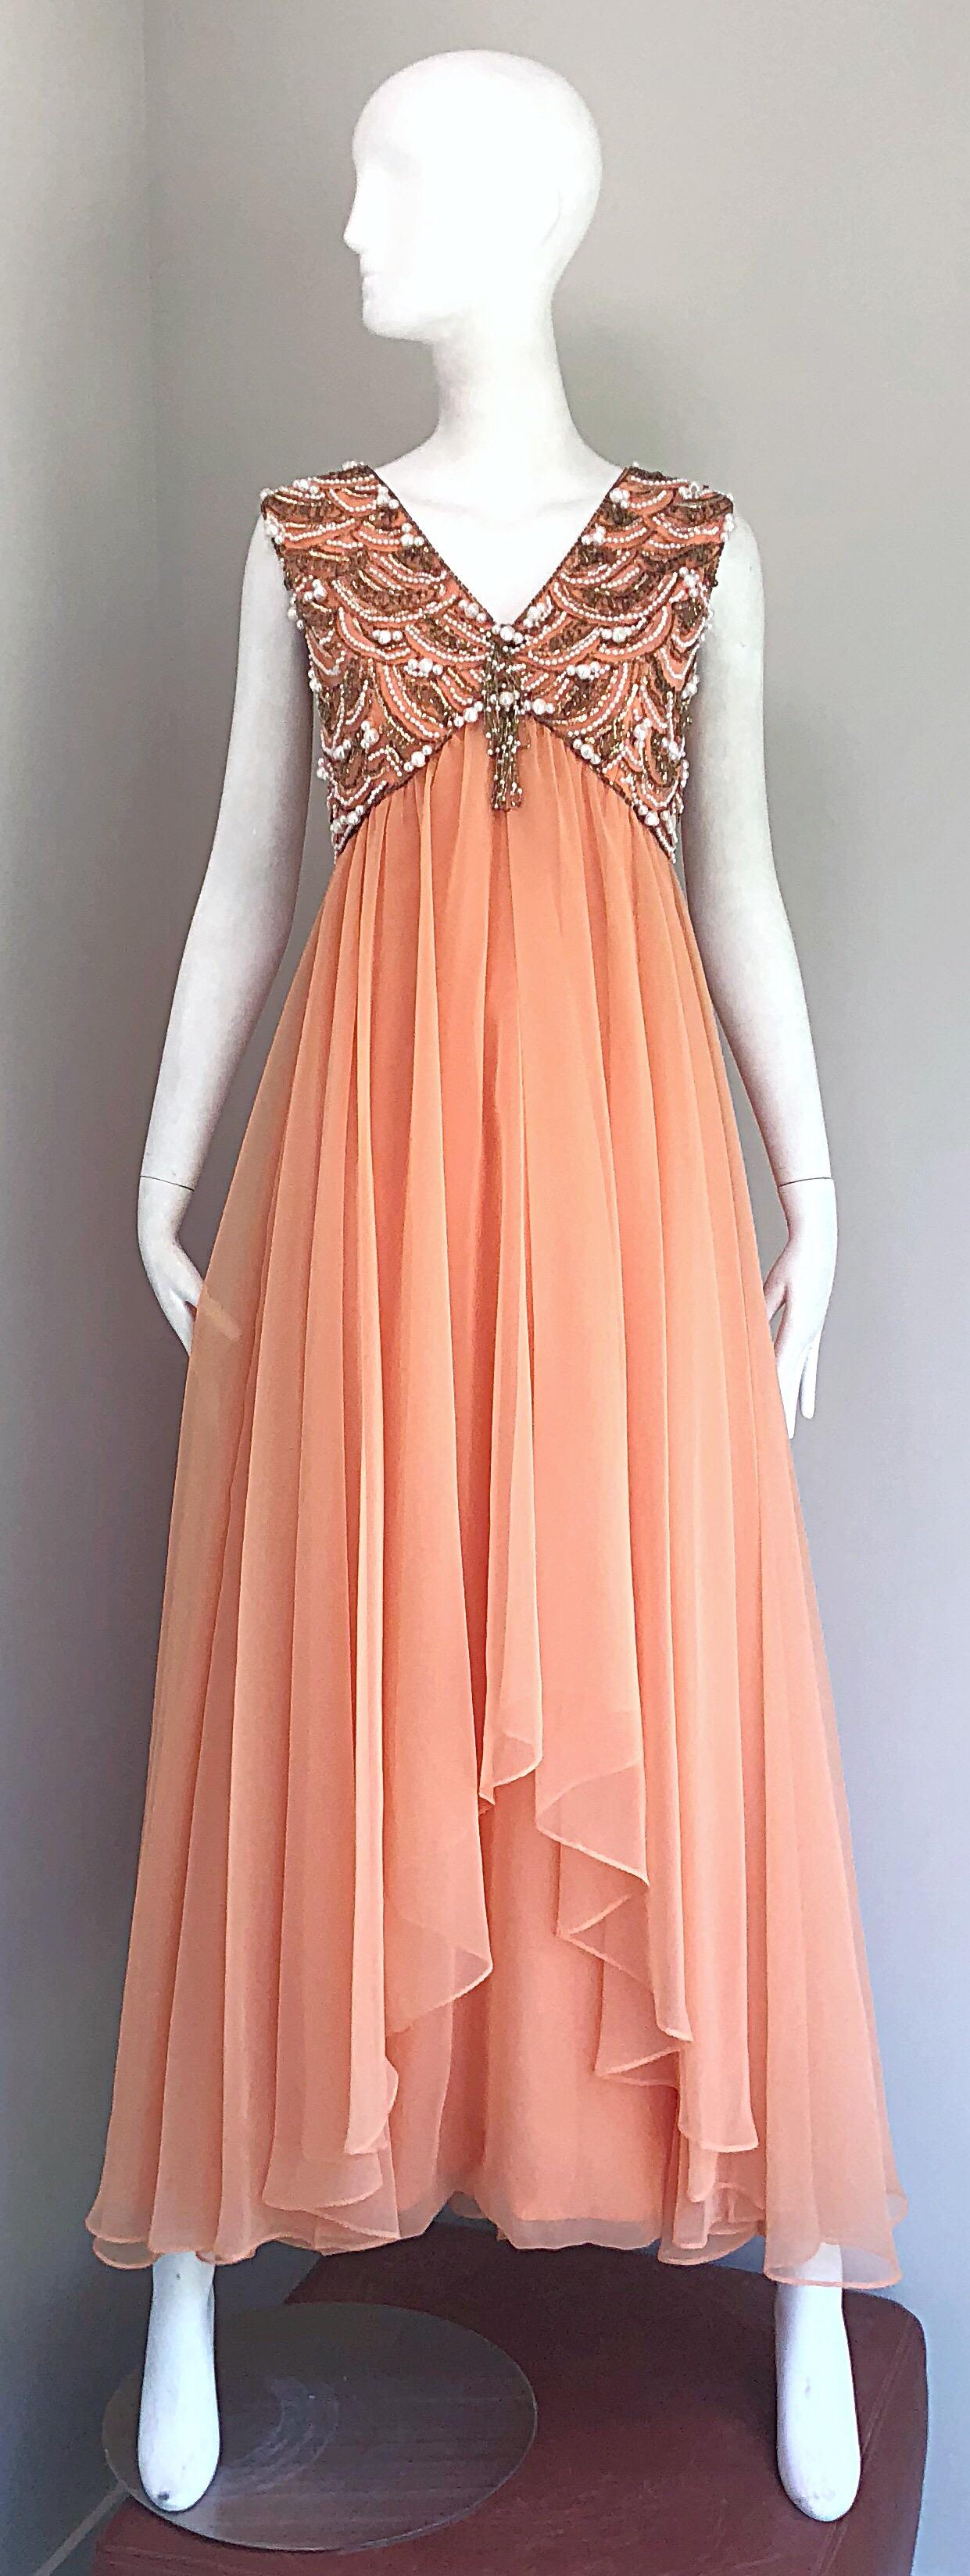 1960s Isabell Gerhart Sherbet Coral Demi Couture Beaded Chiffon 60s Gown Dress For Sale 7